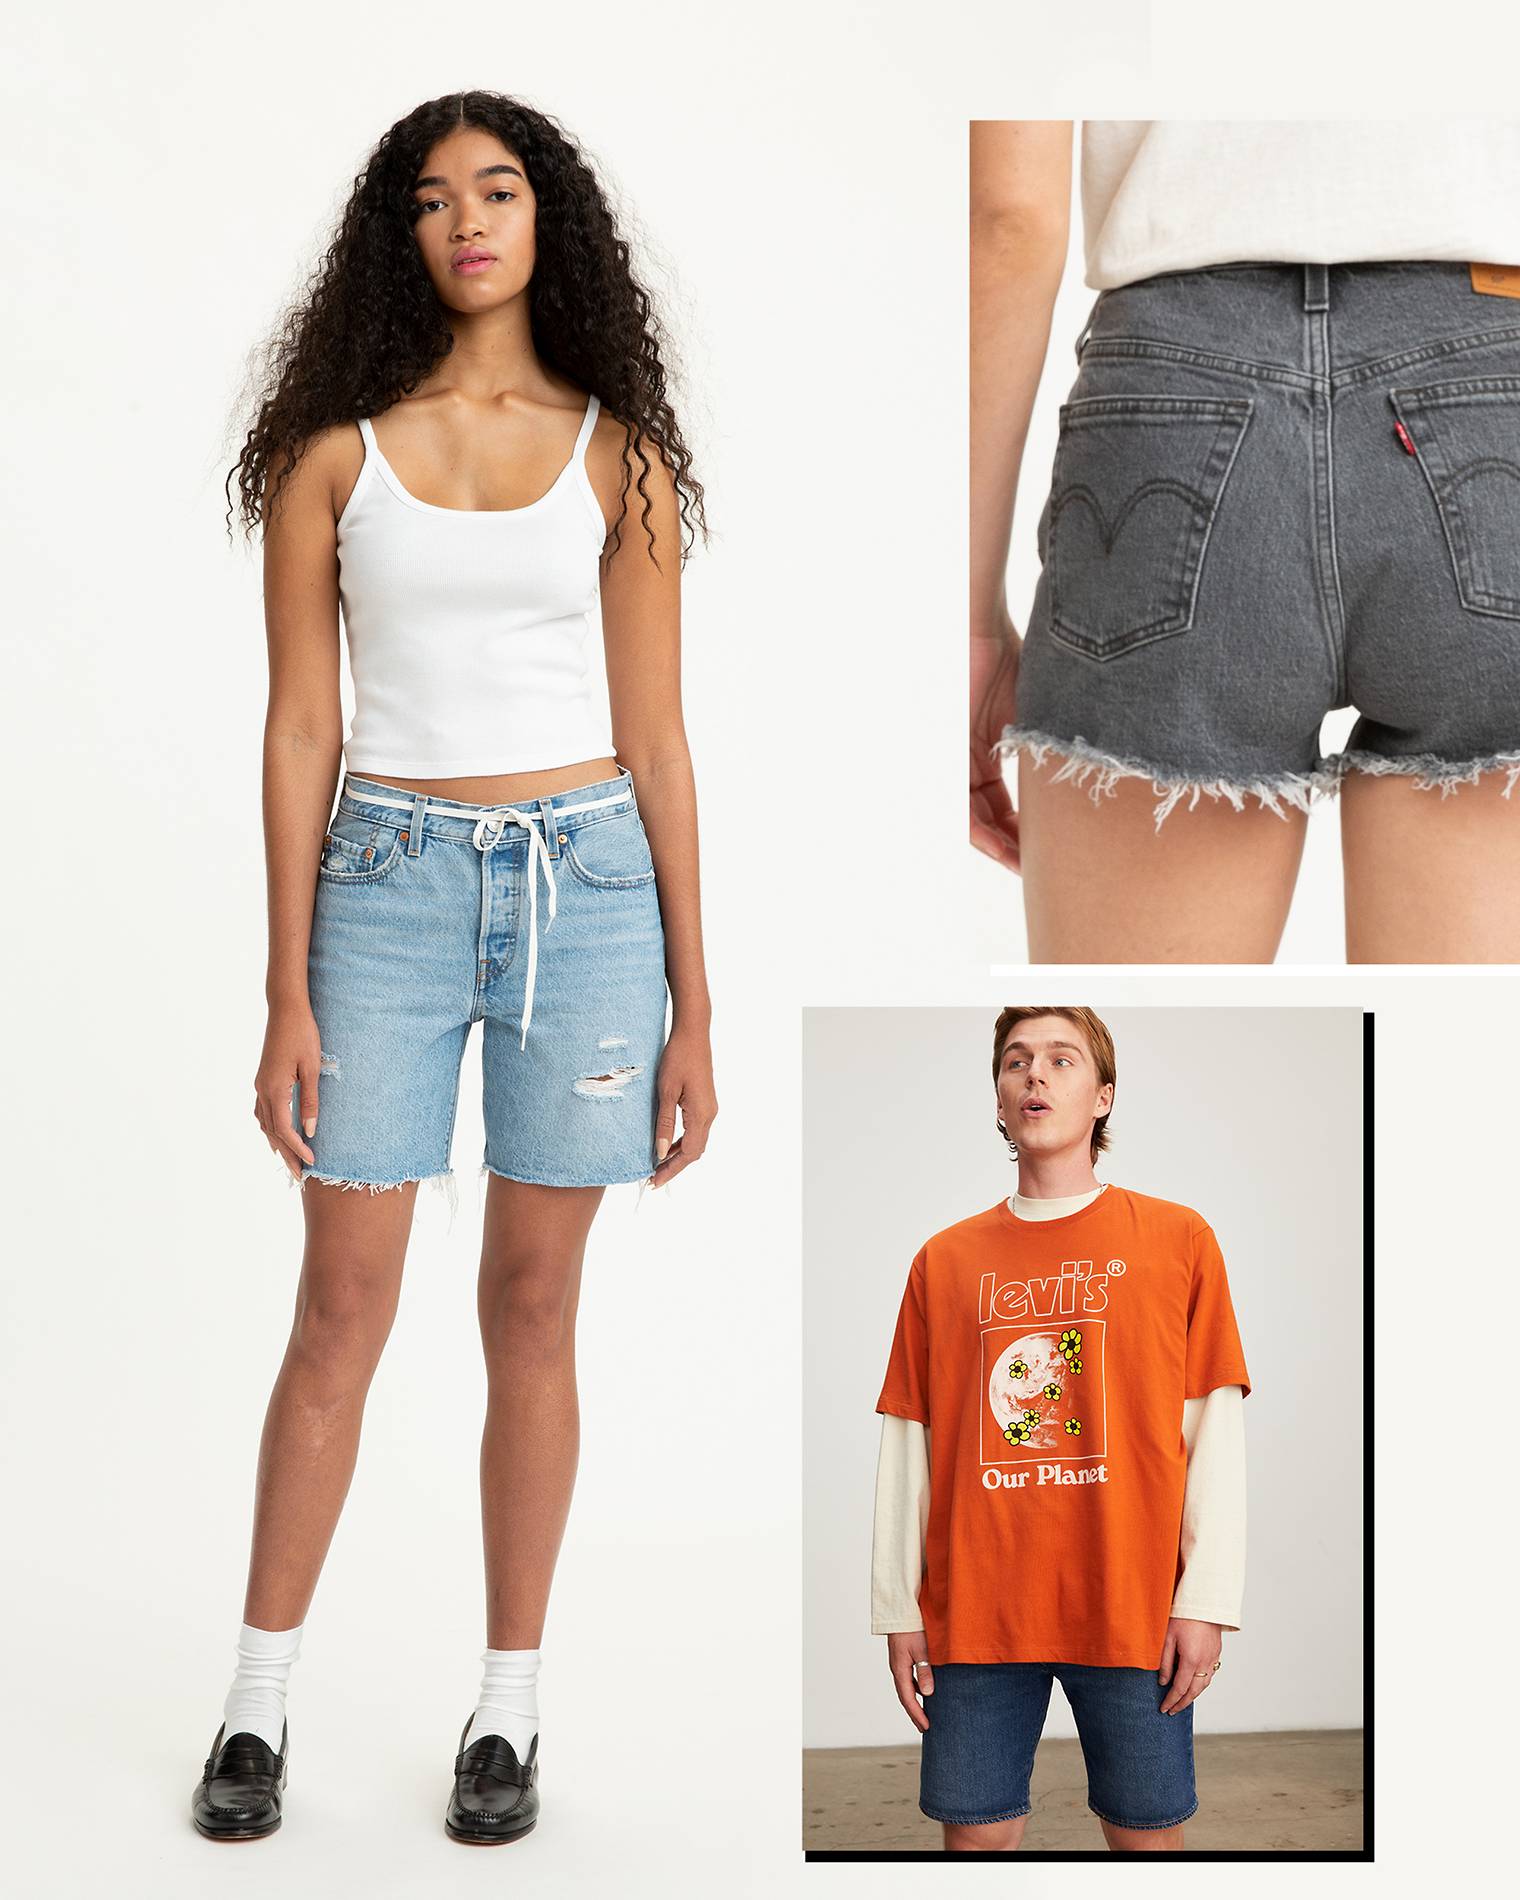 Man and women styled with Levi's denim shorts